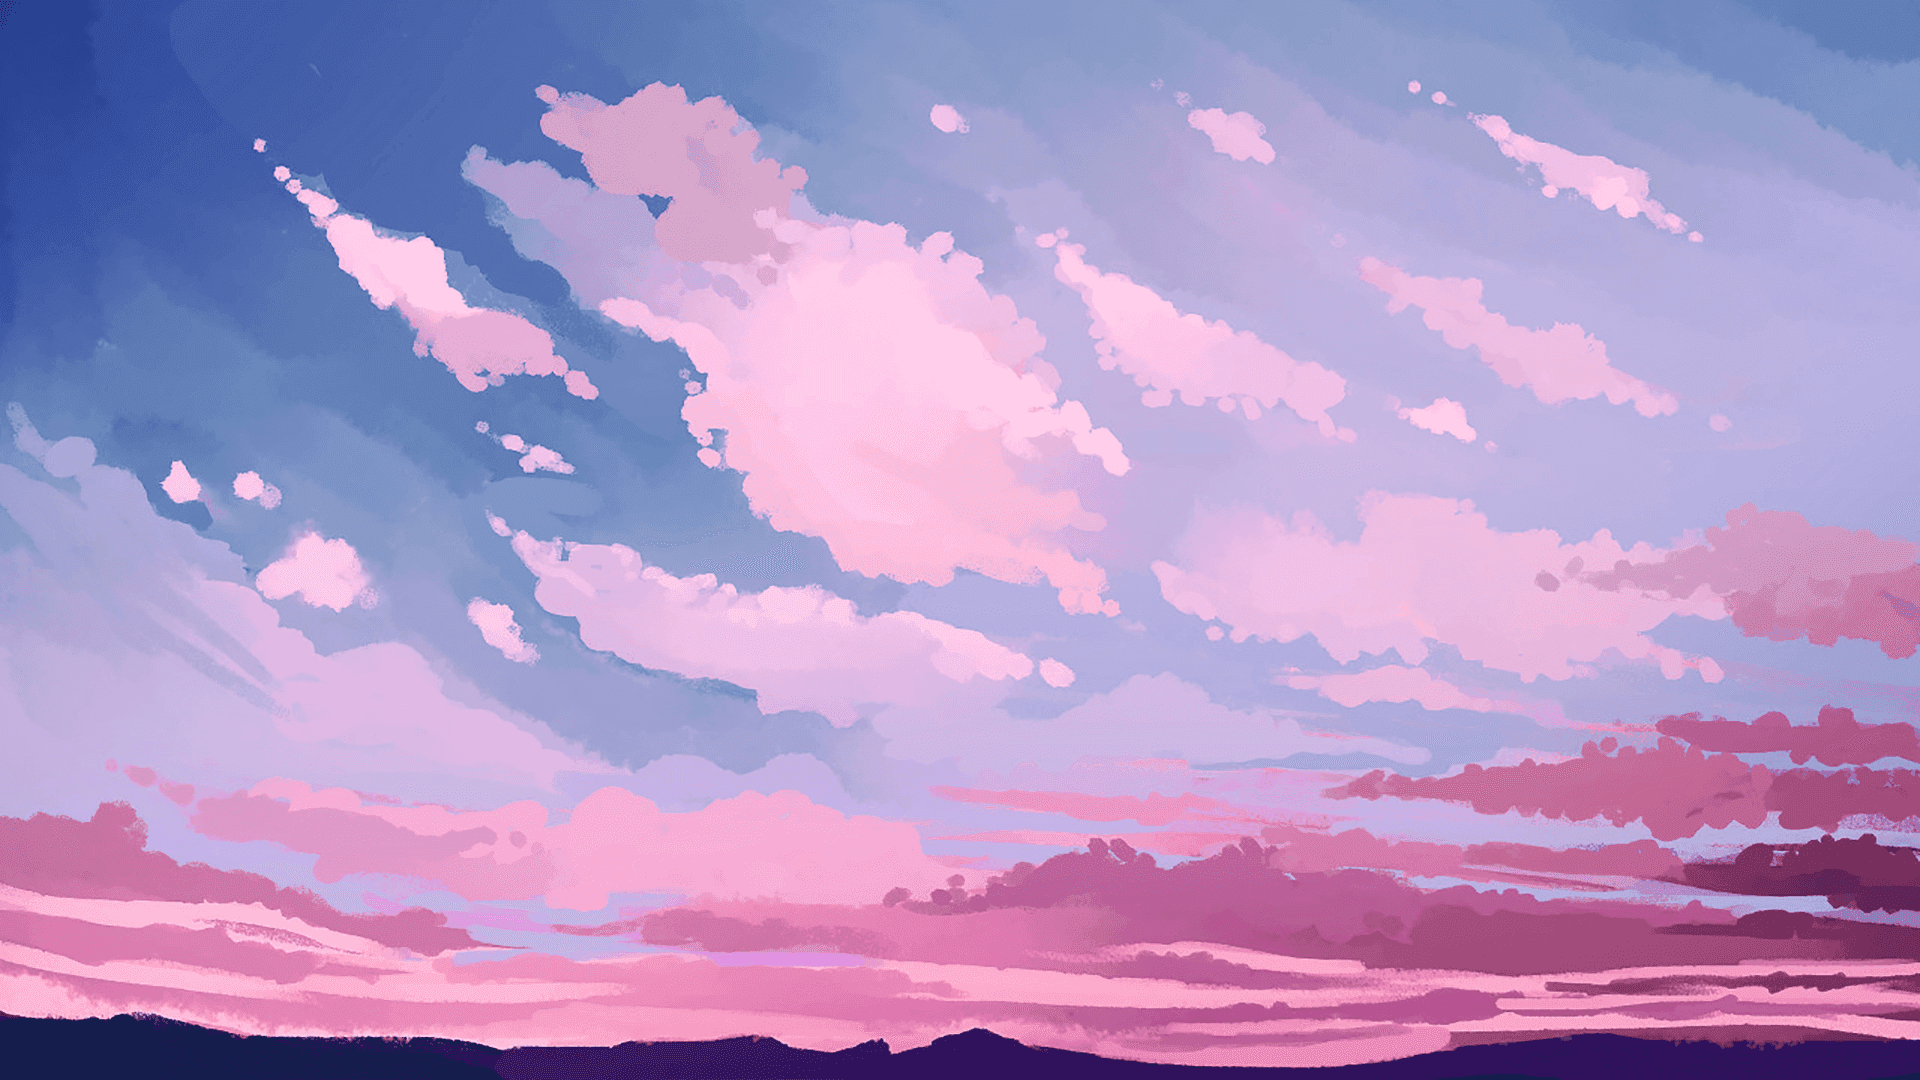 A peaceful sunrise fills the sky with a pink cloud blanket